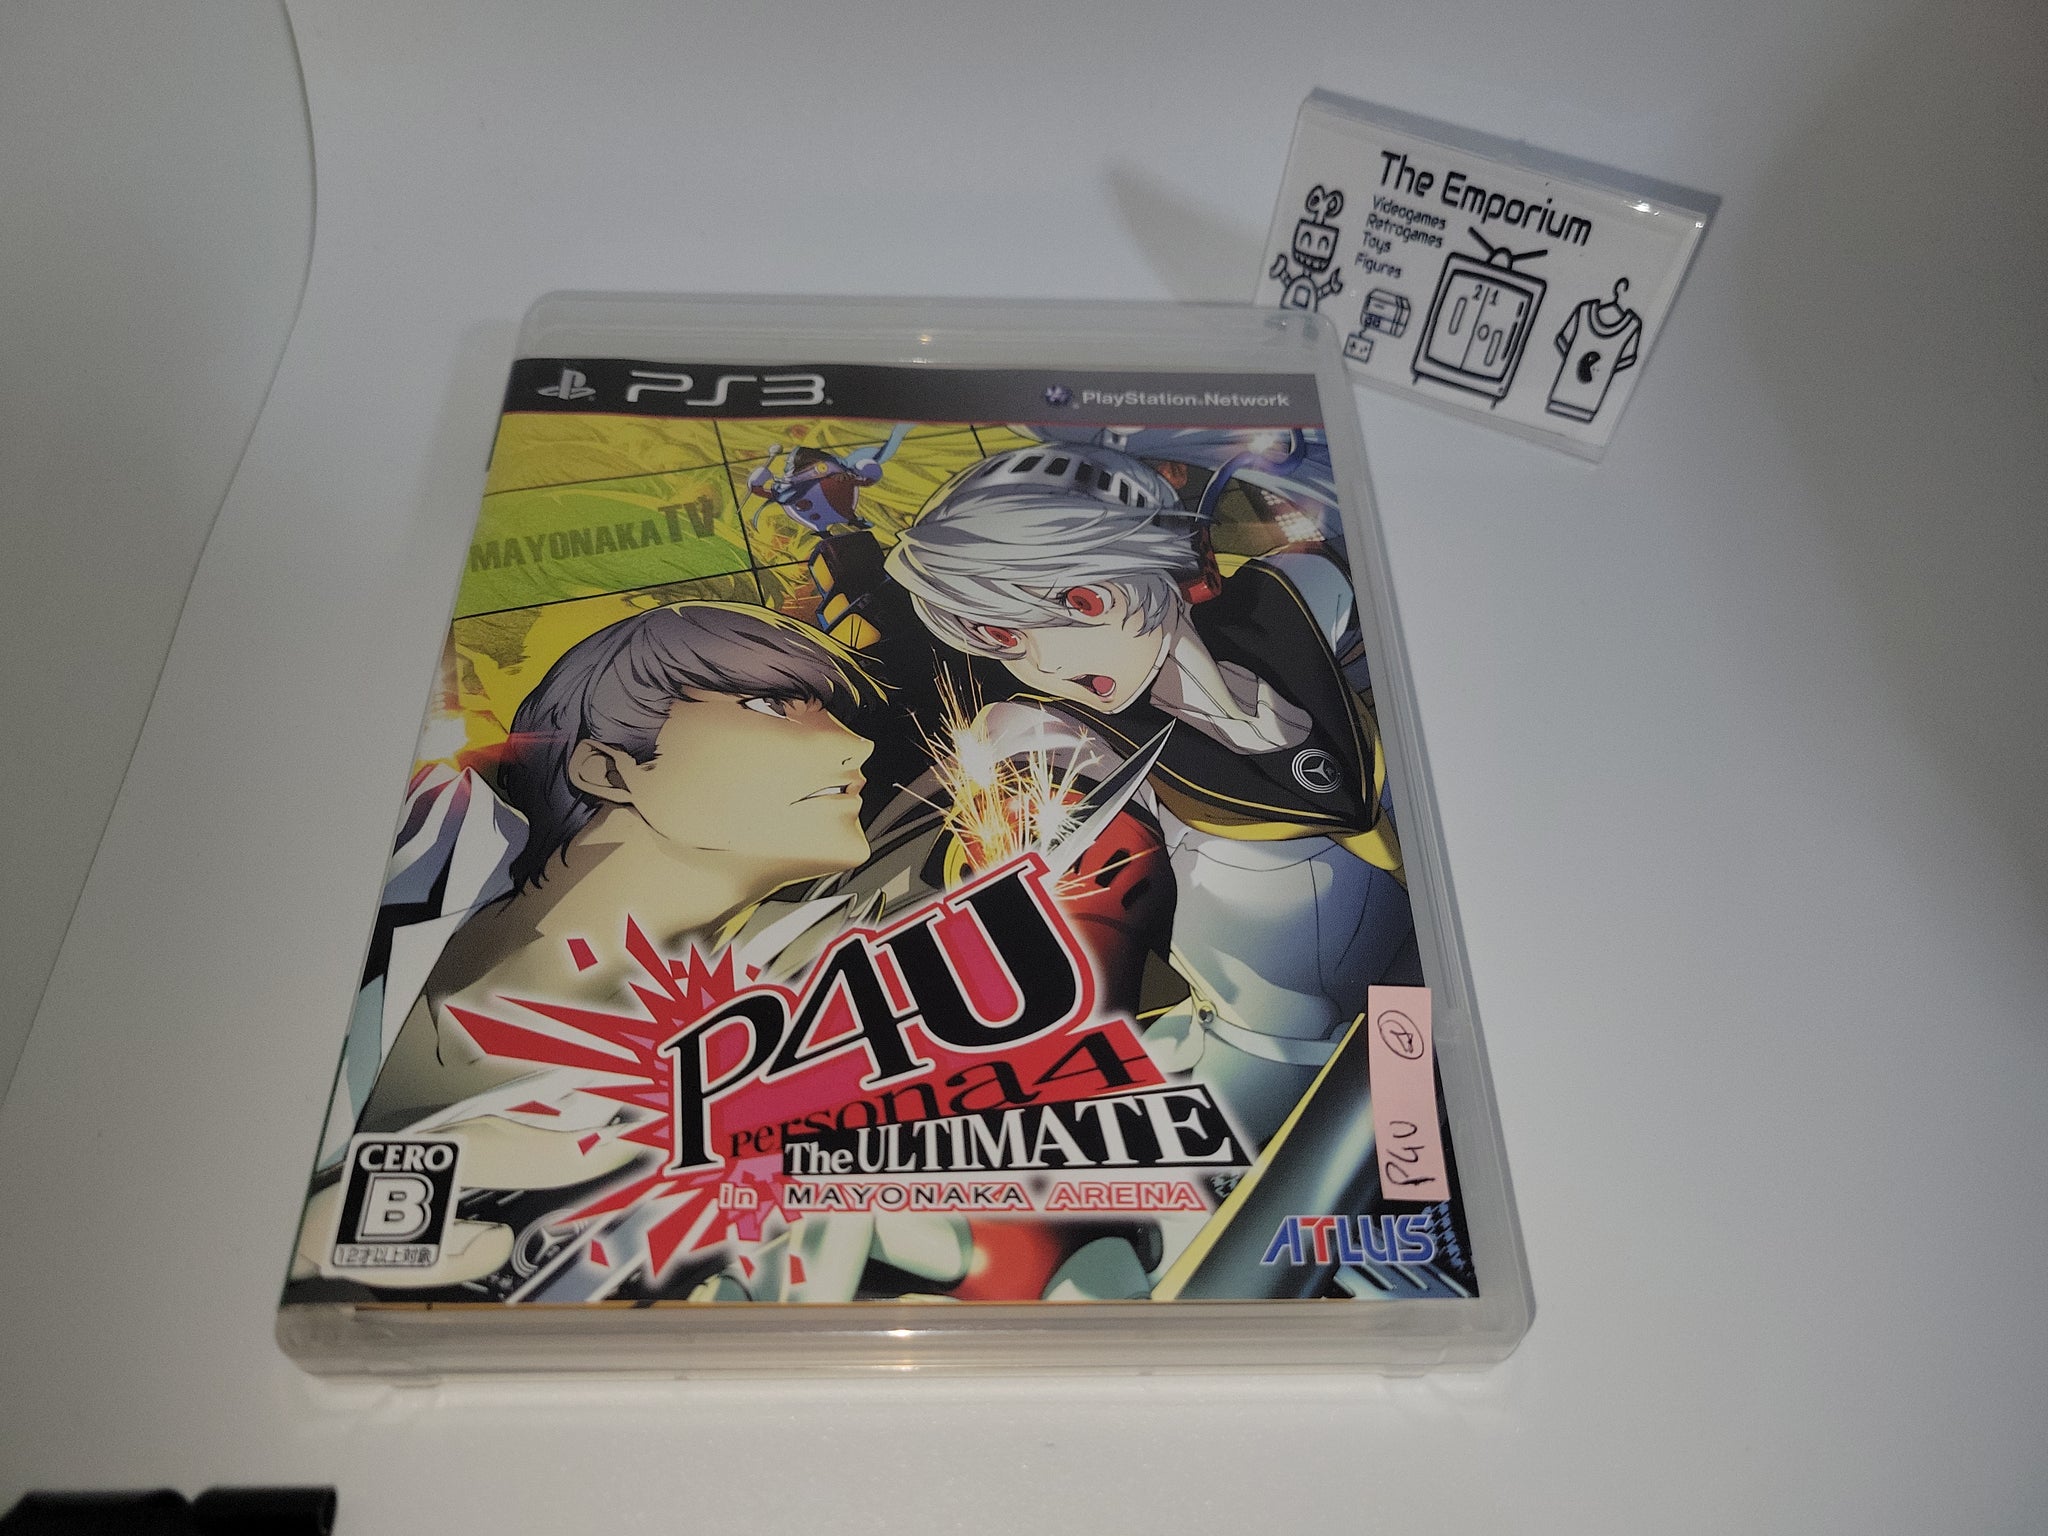 Persona the ultimate mayonaka arena - Sony PS3 Playstation 3 – The Emporium RetroGames and Toys